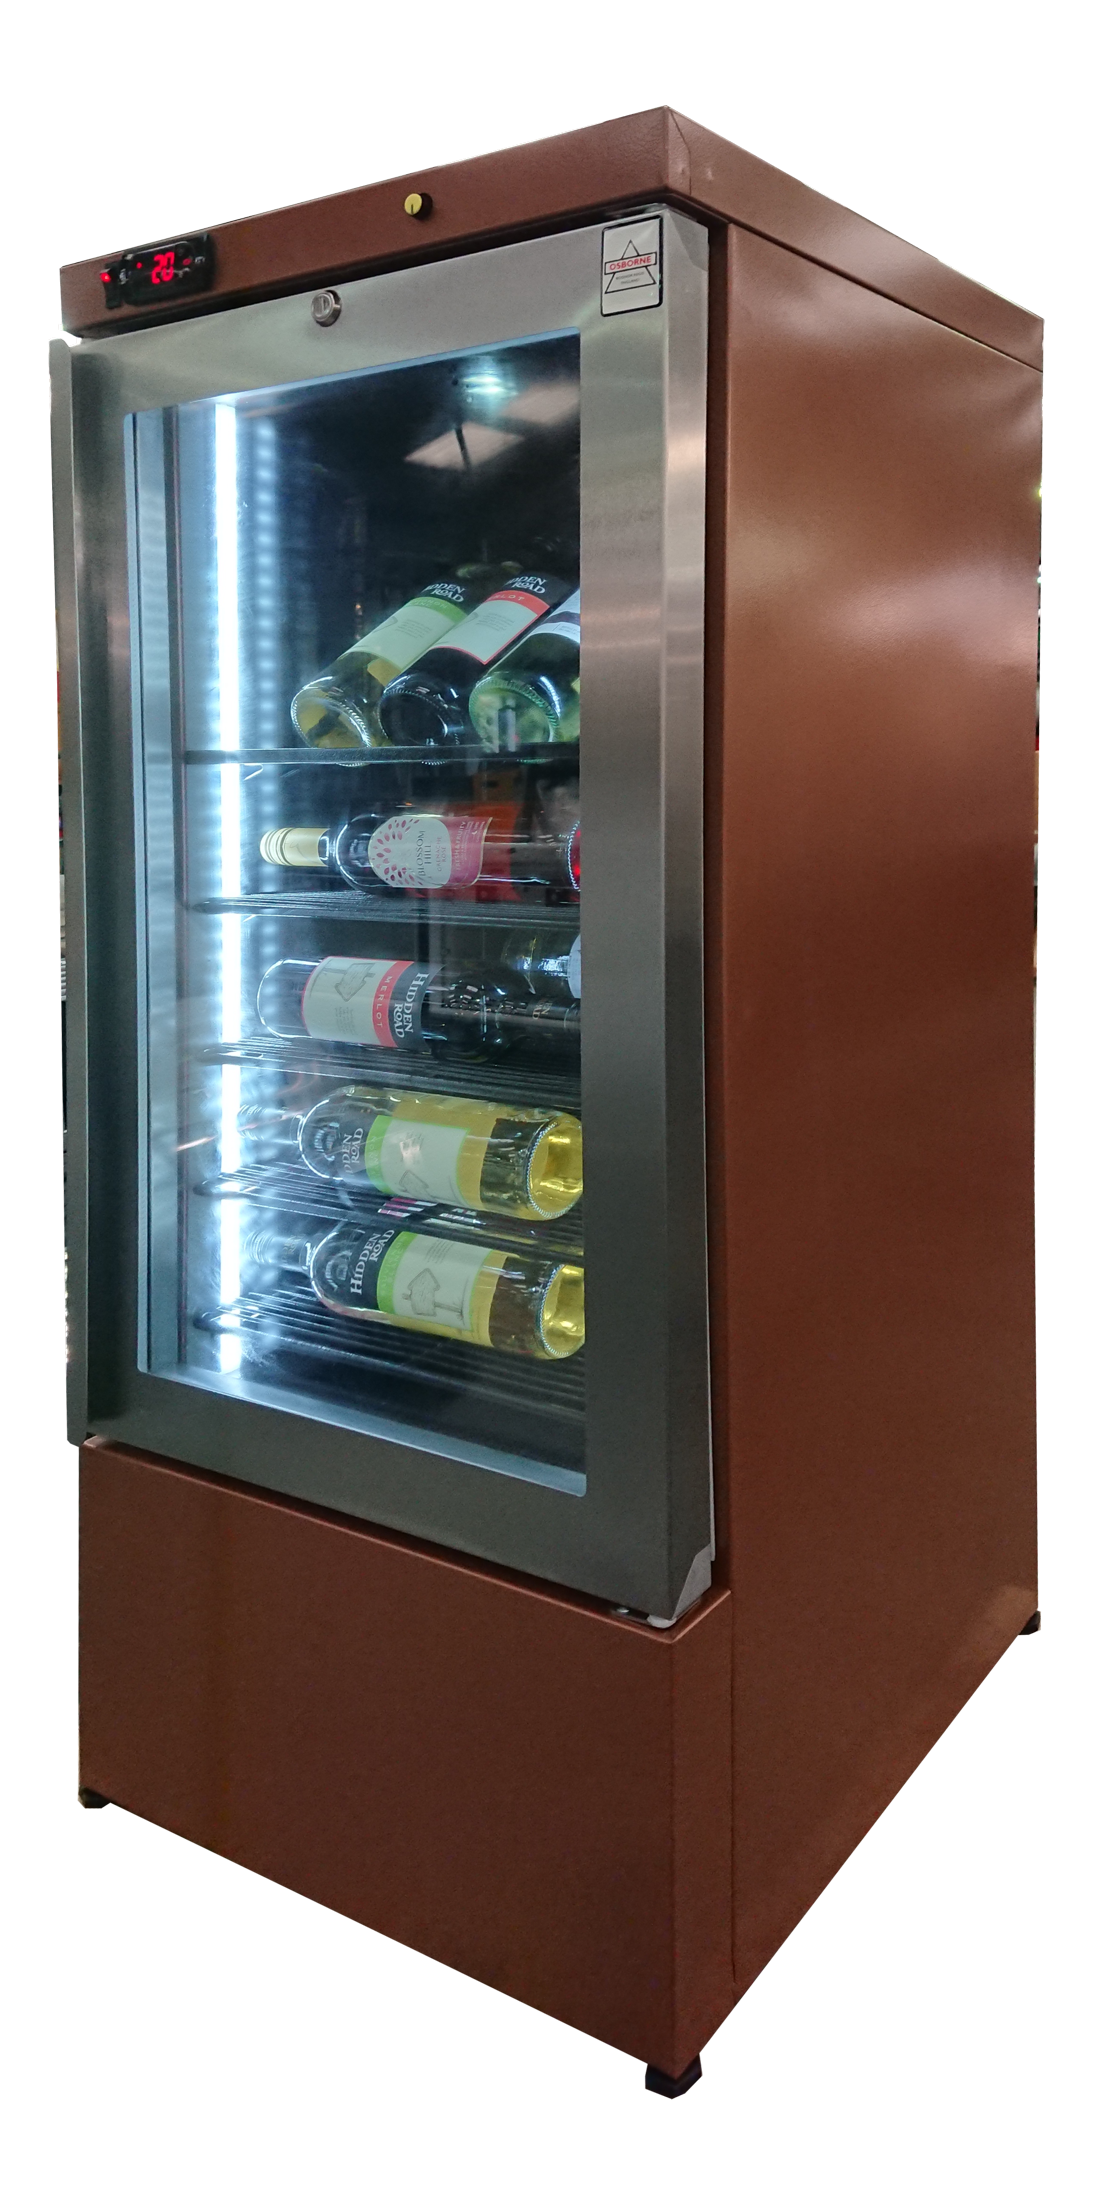 A wide range of wine fridges available